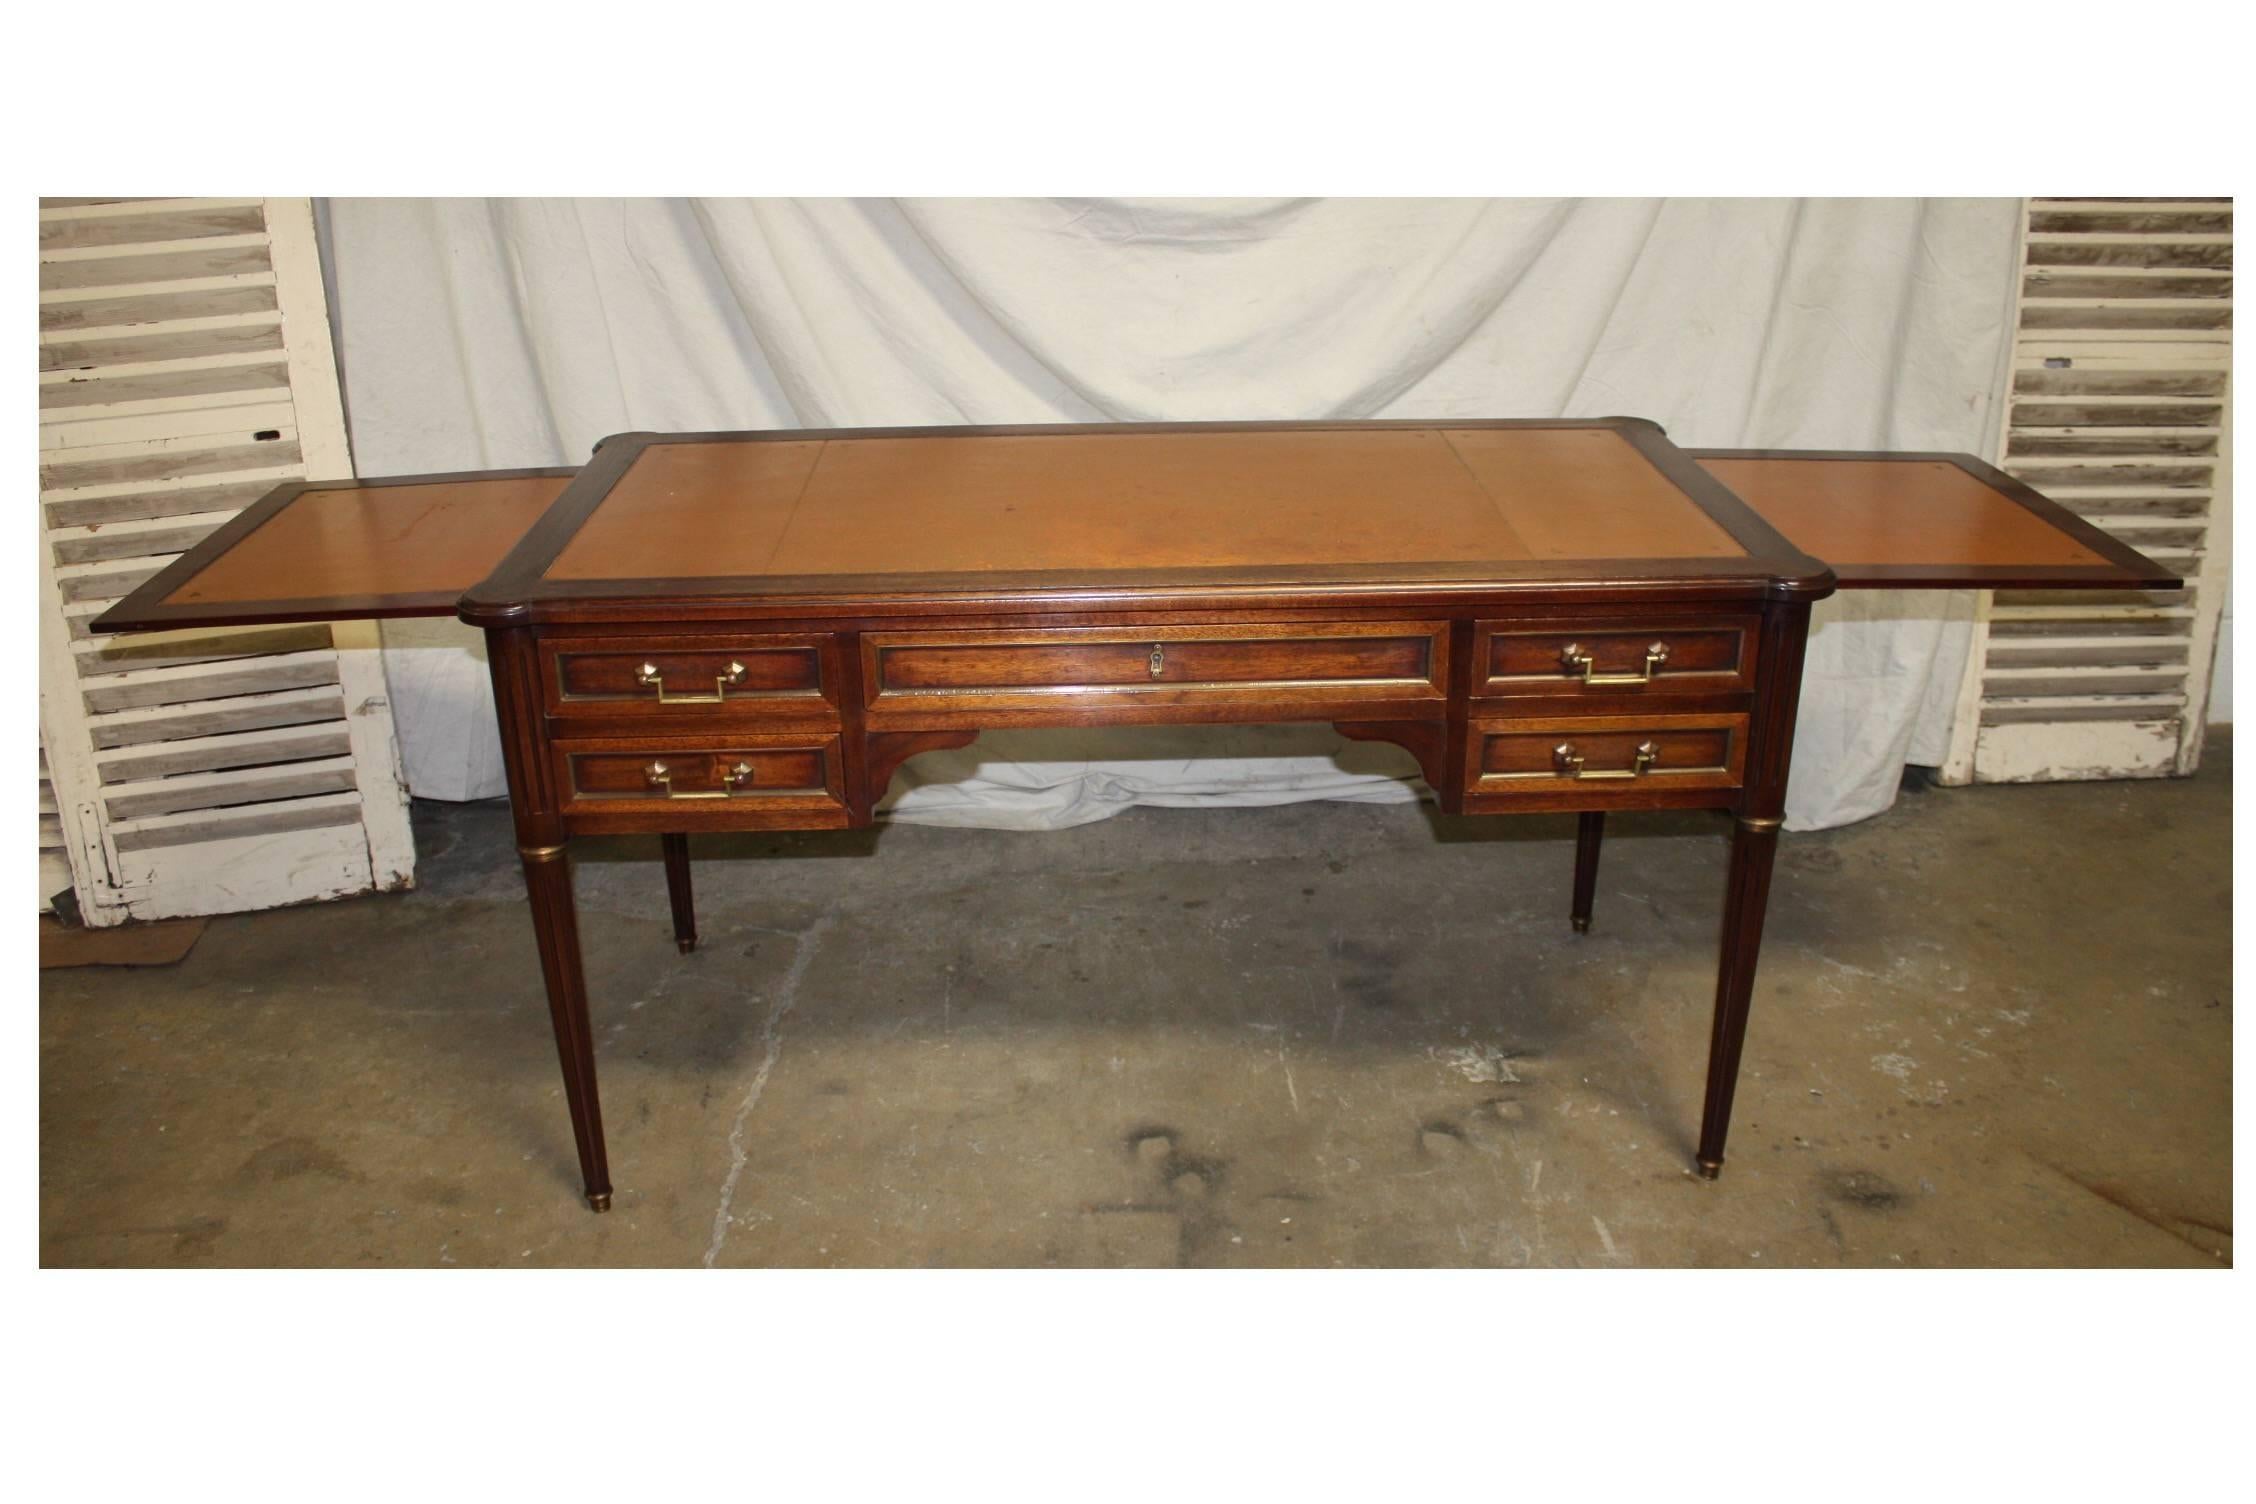 Charming Louis XVI style desk with two extensions on each side and its original leather top.
Each extension 16 inches W x 21.25 inches D.